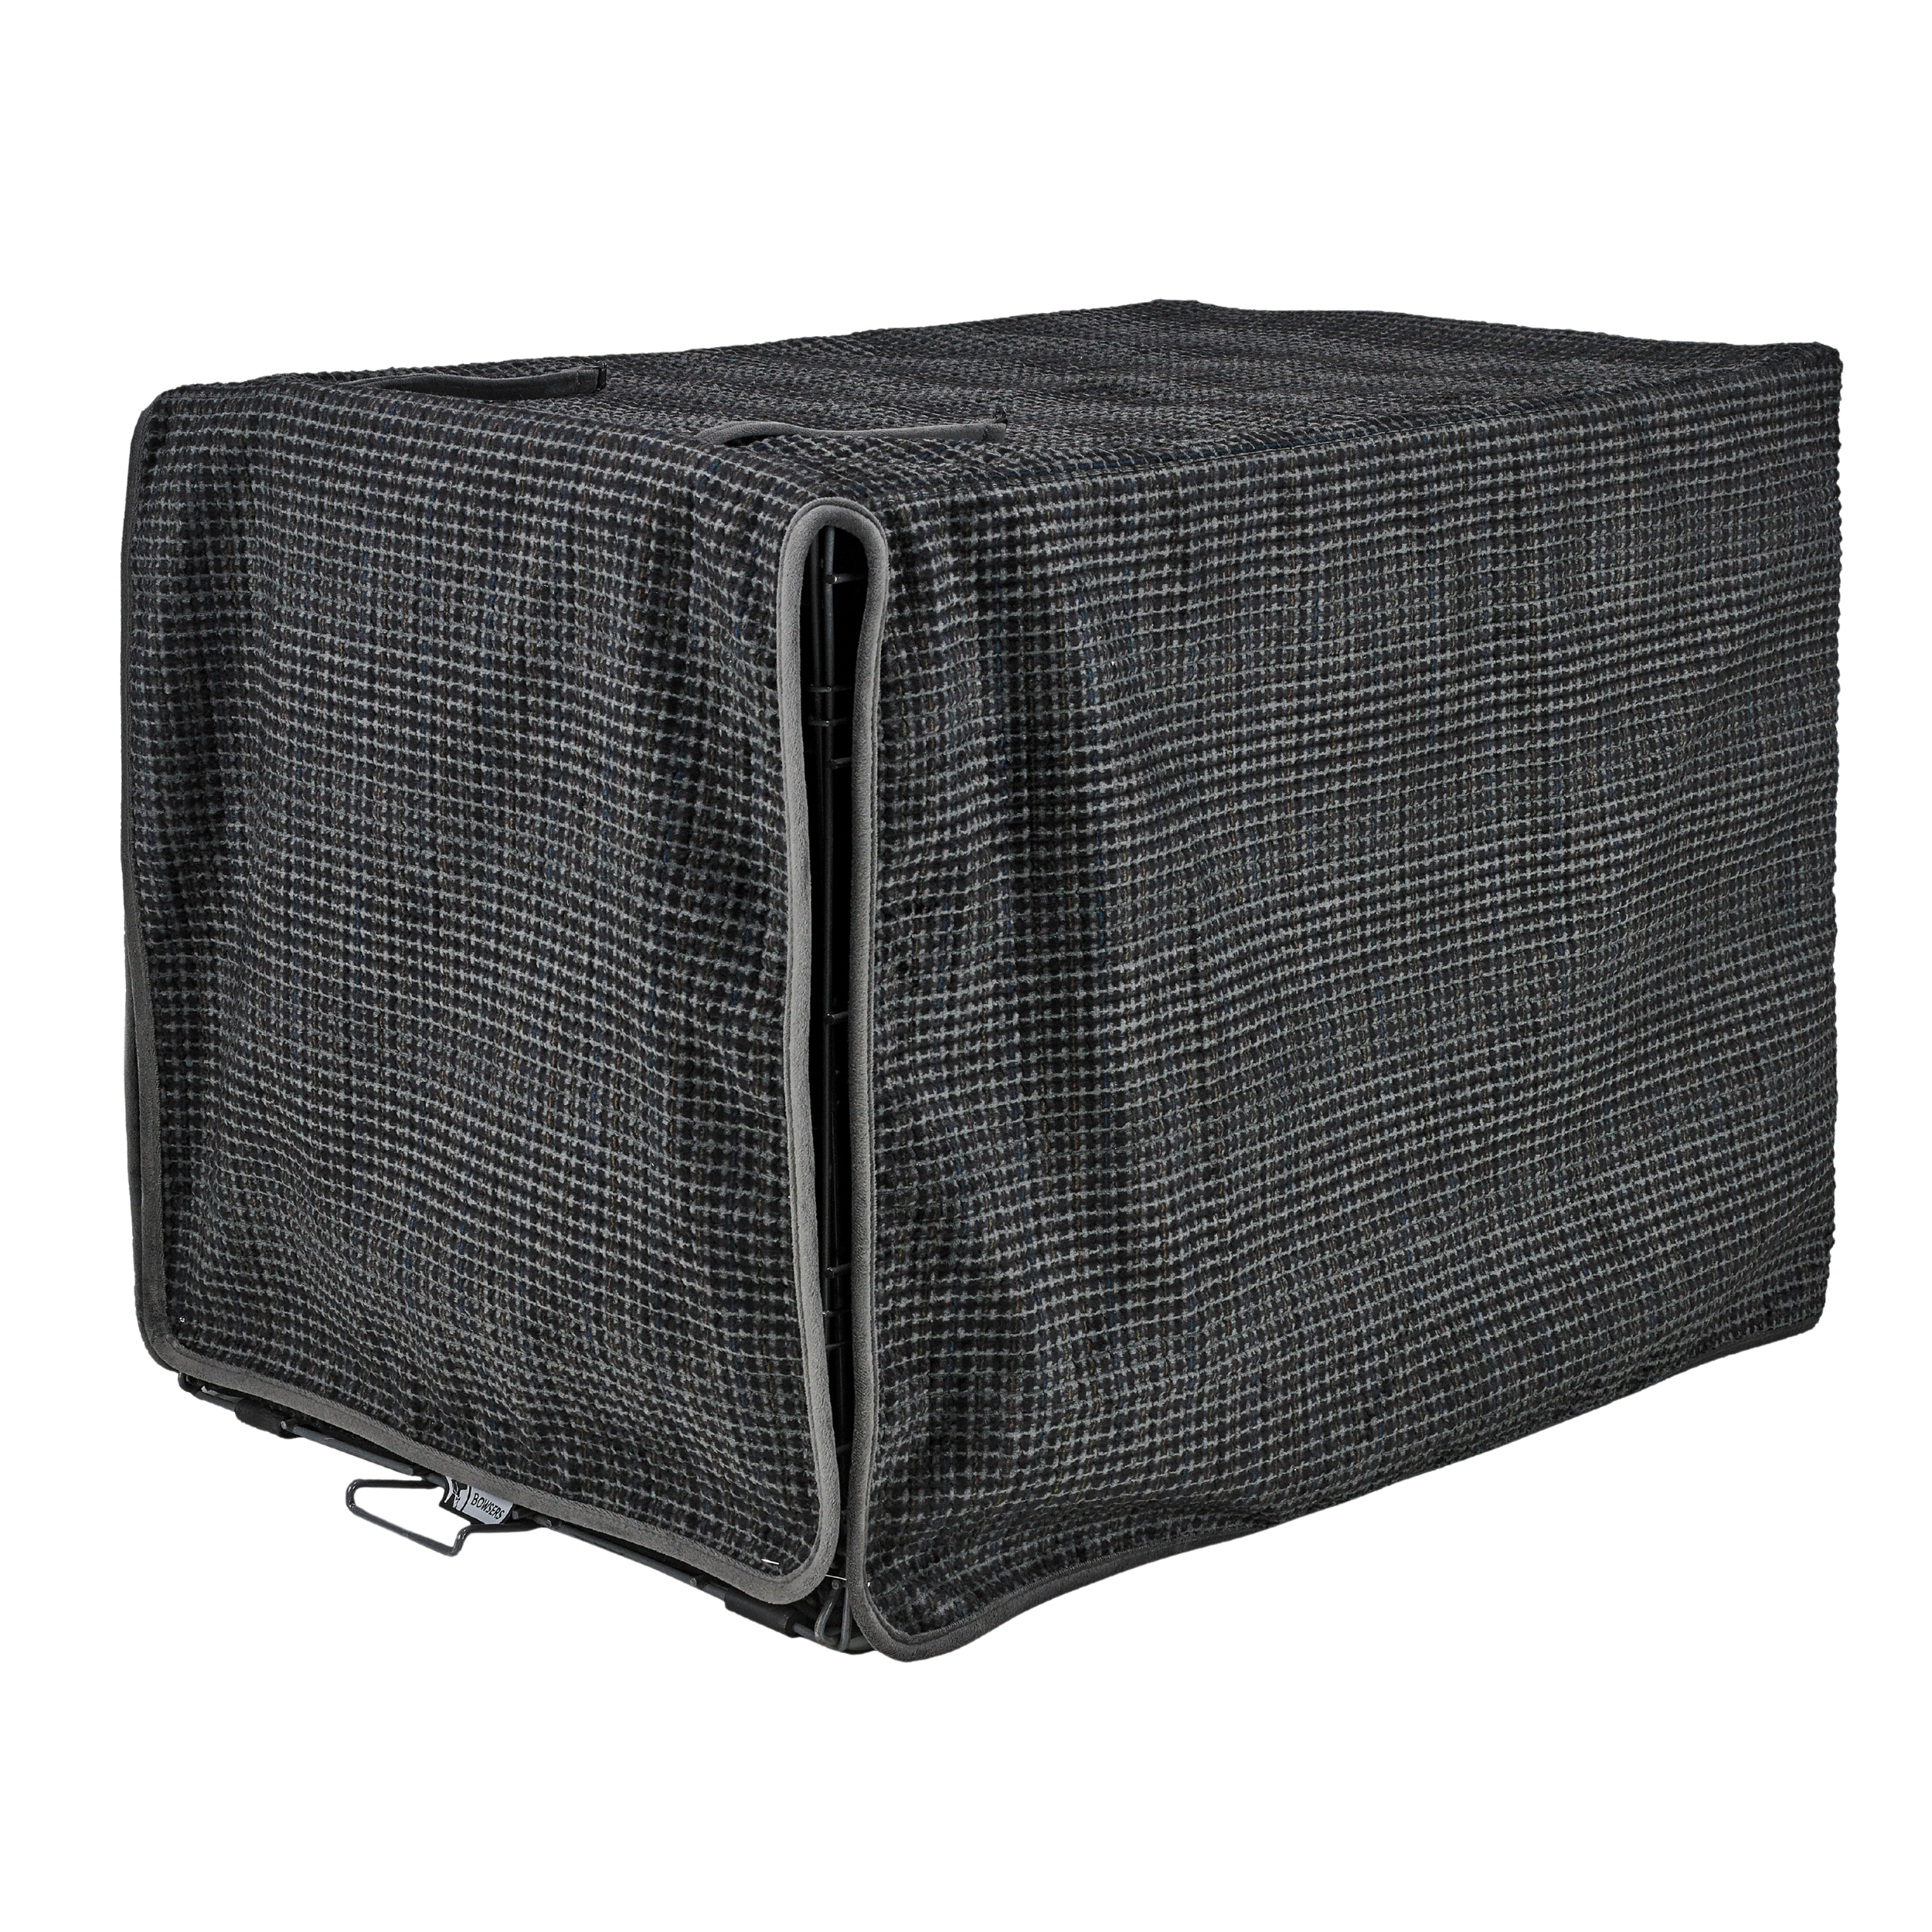 IRON-MOUNTAIN-LUXURY-CRATE-COVER